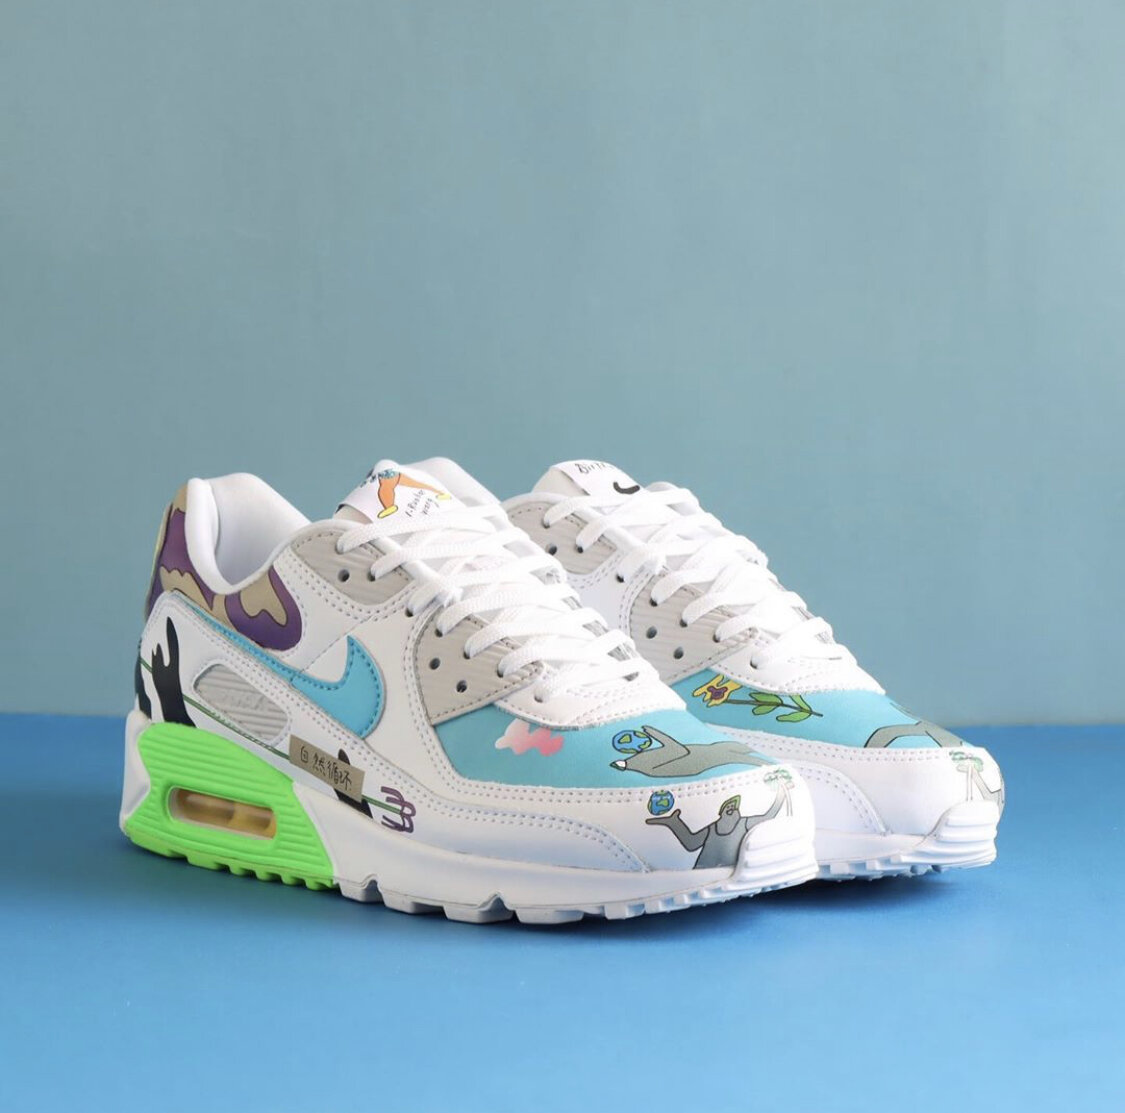 CNK-ruohan-wang-nike-collection-Air-Max-90-overview.jpeg